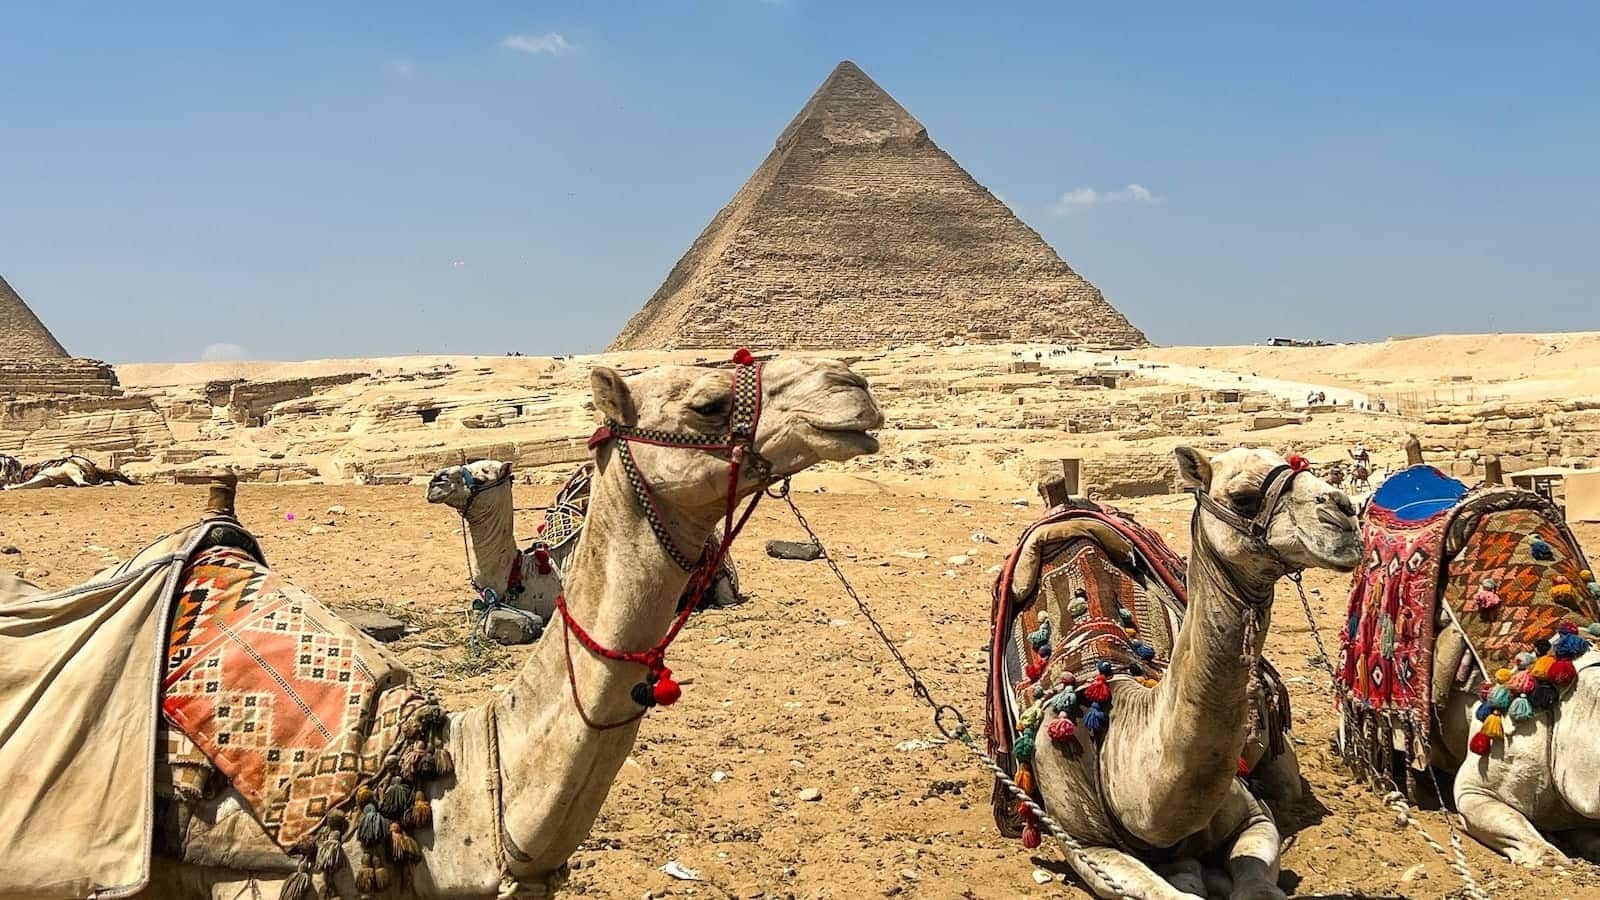 Camels in front of the pyramids in Giza, Egypt.